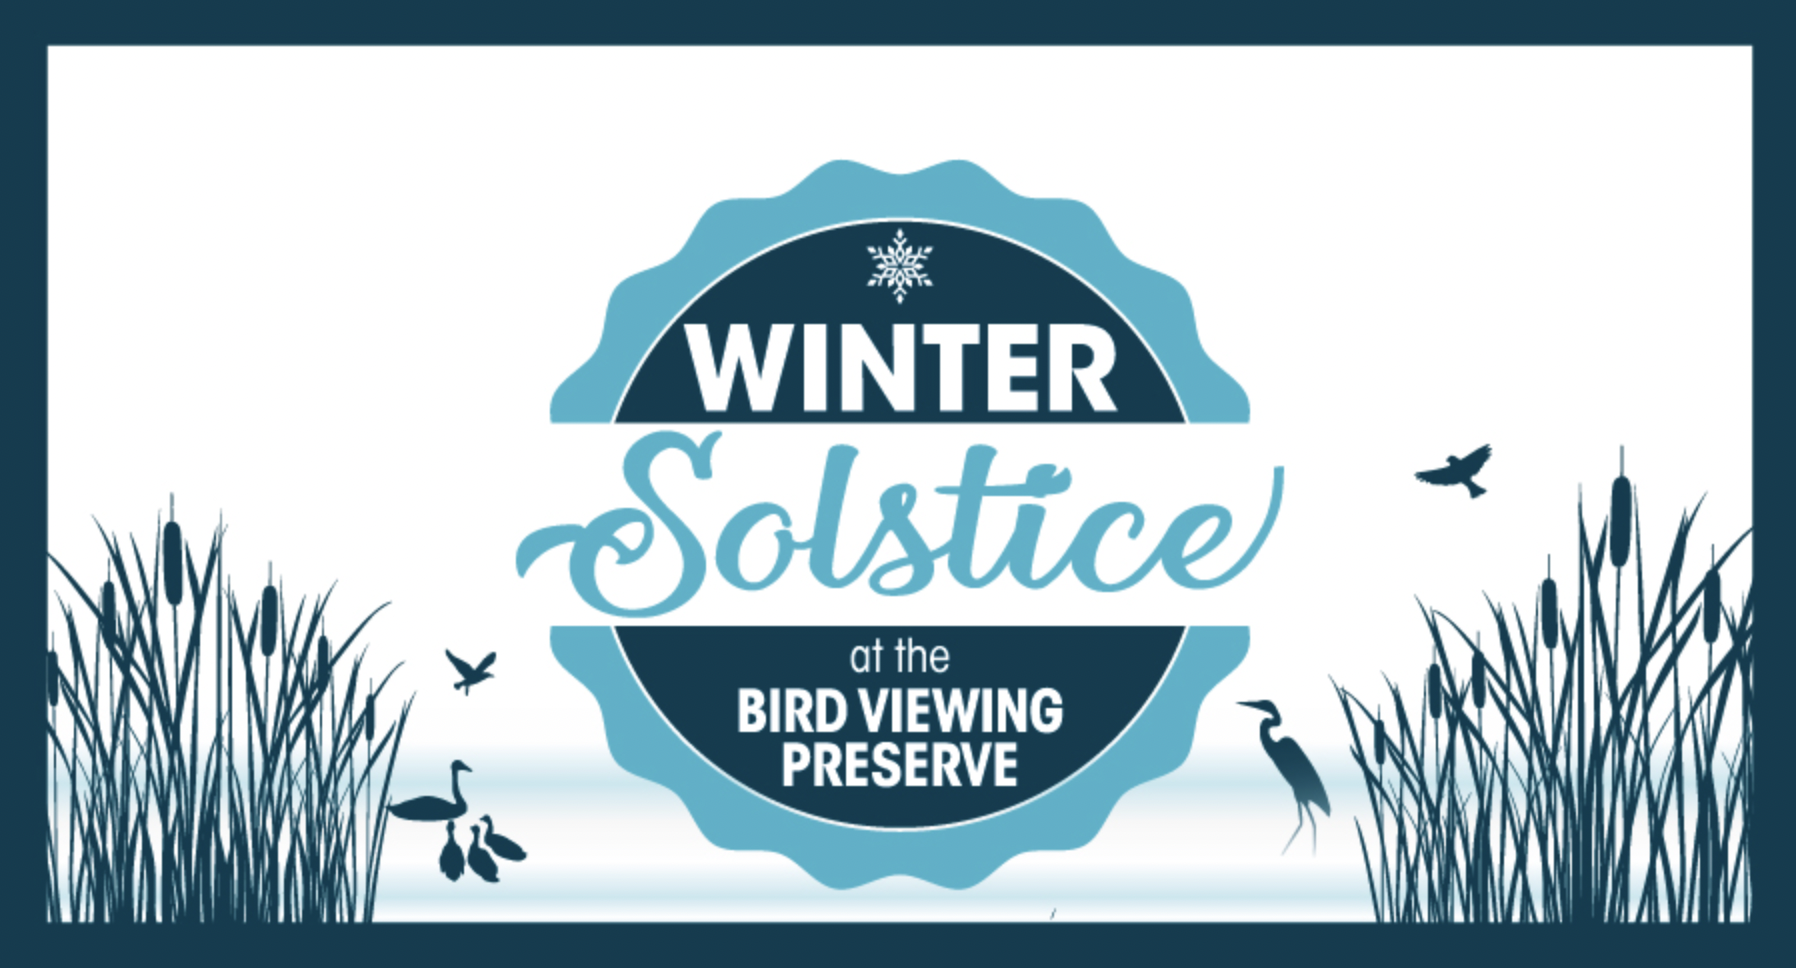 Winter Solstice at the Bird Viewing Preserve